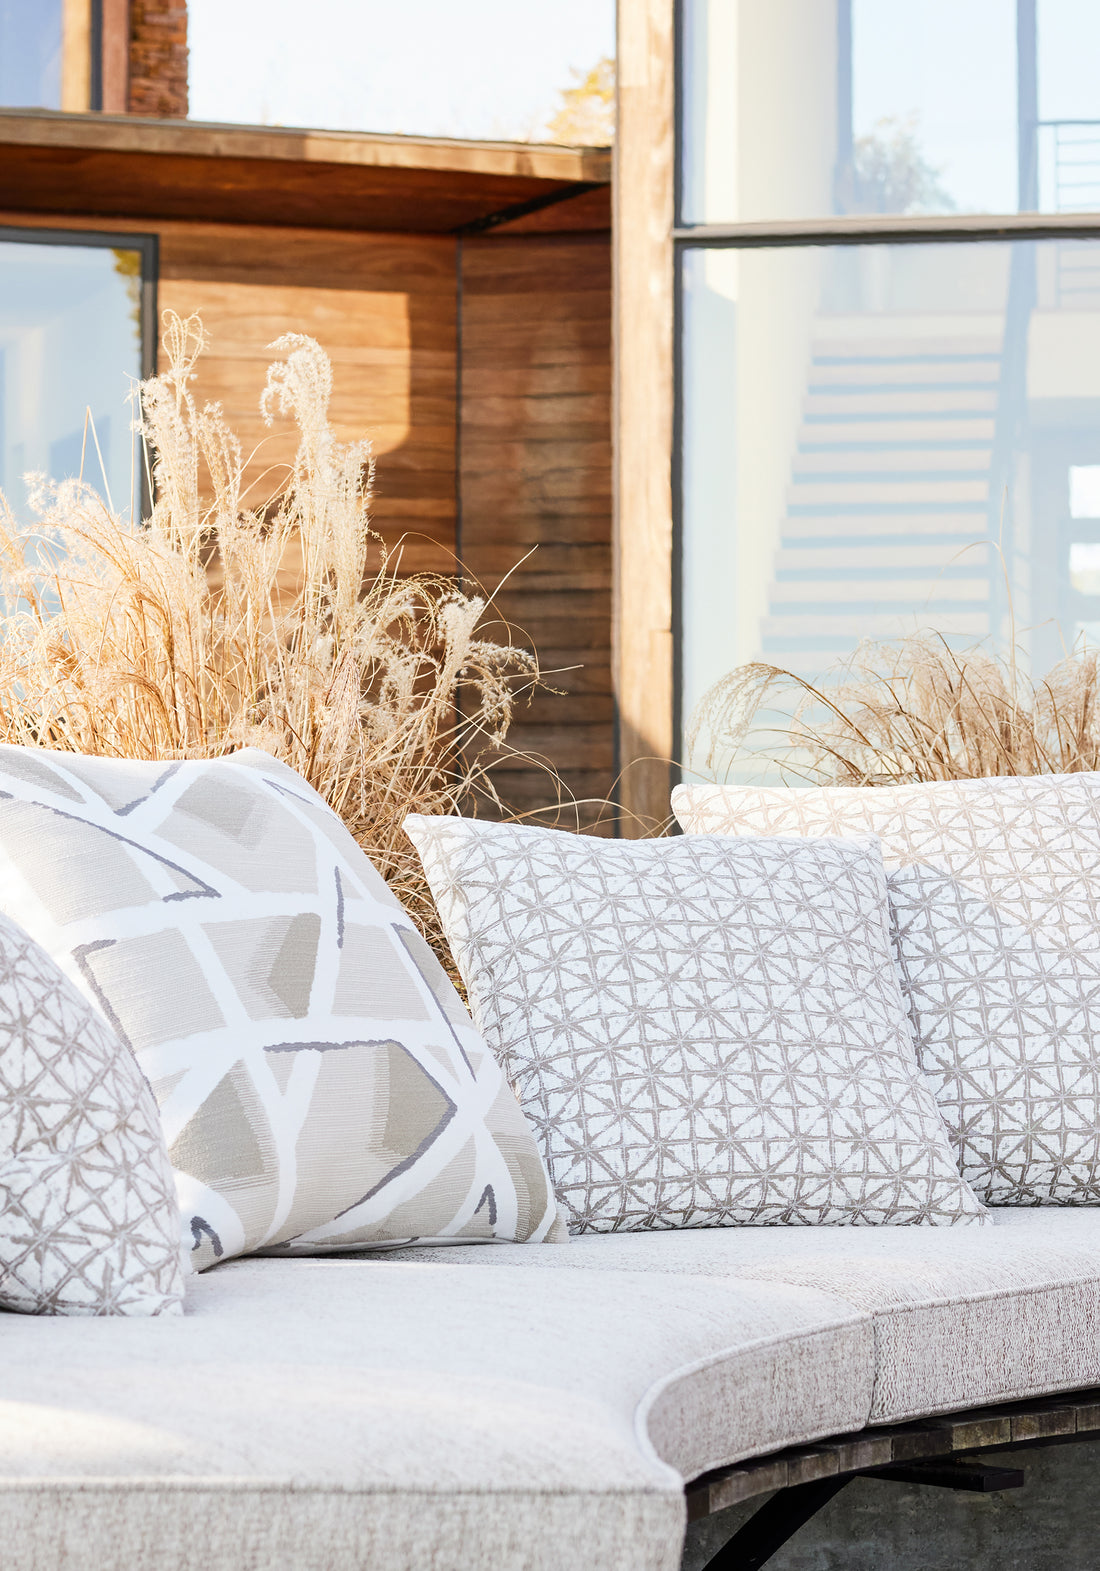 Pillow featuring Hazen fabric in sahara color - pattern number W8833 - by Thibaut in the Haven collection